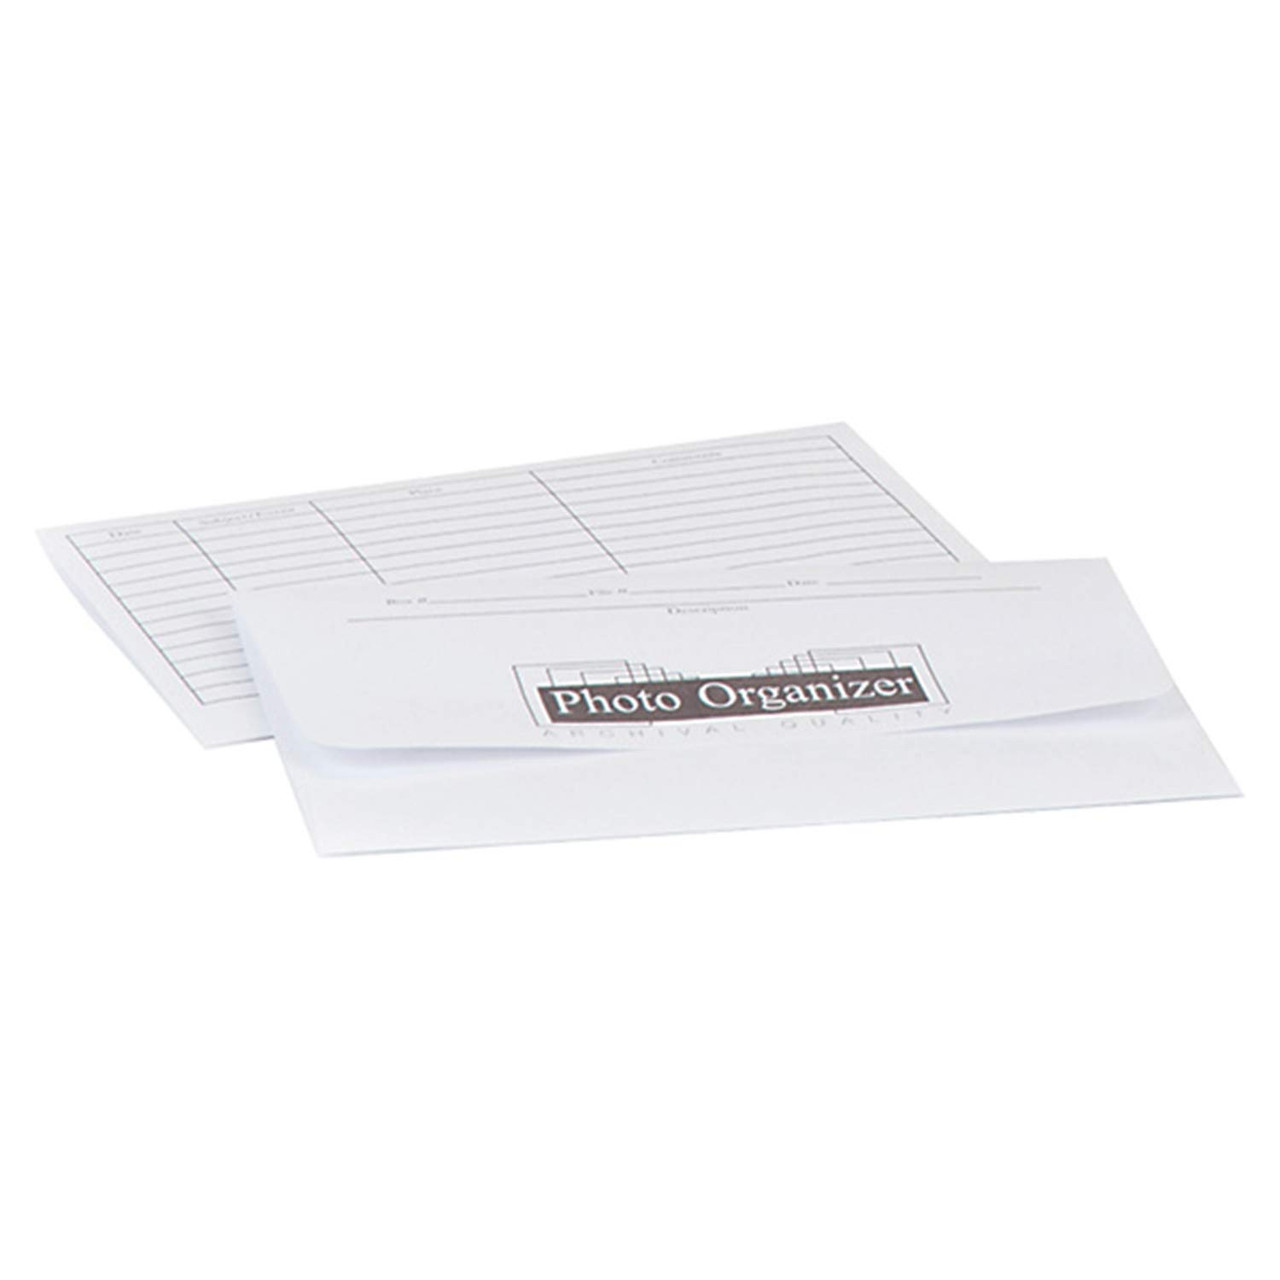 12x18 Conservation White Backing Board - Shop Now